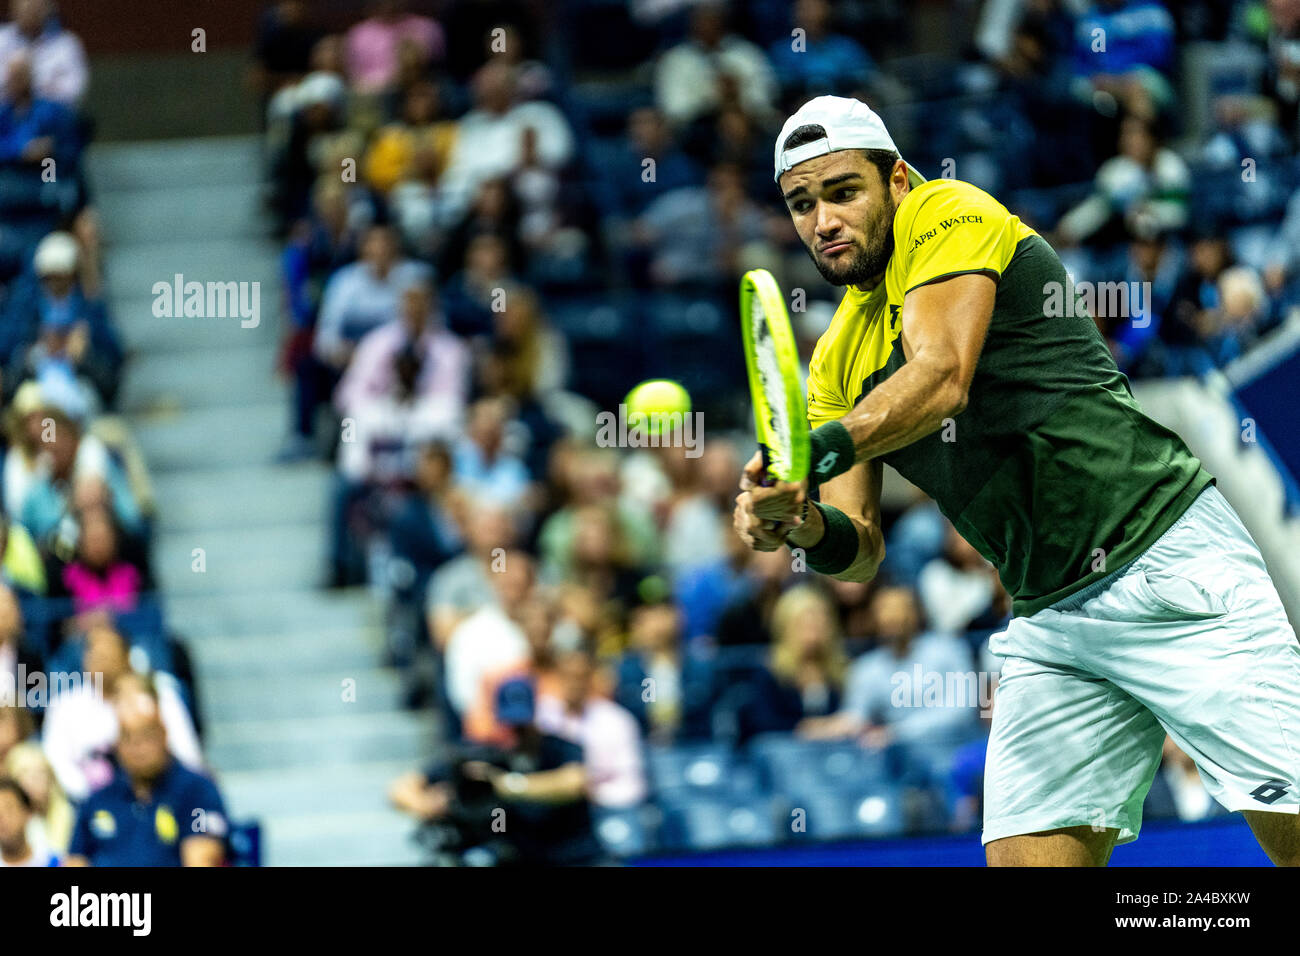 Matteo Berrettini of Italy competing in   the Men's Semi-Finals at the 2019 US Open Tennis Championship Stock Photo